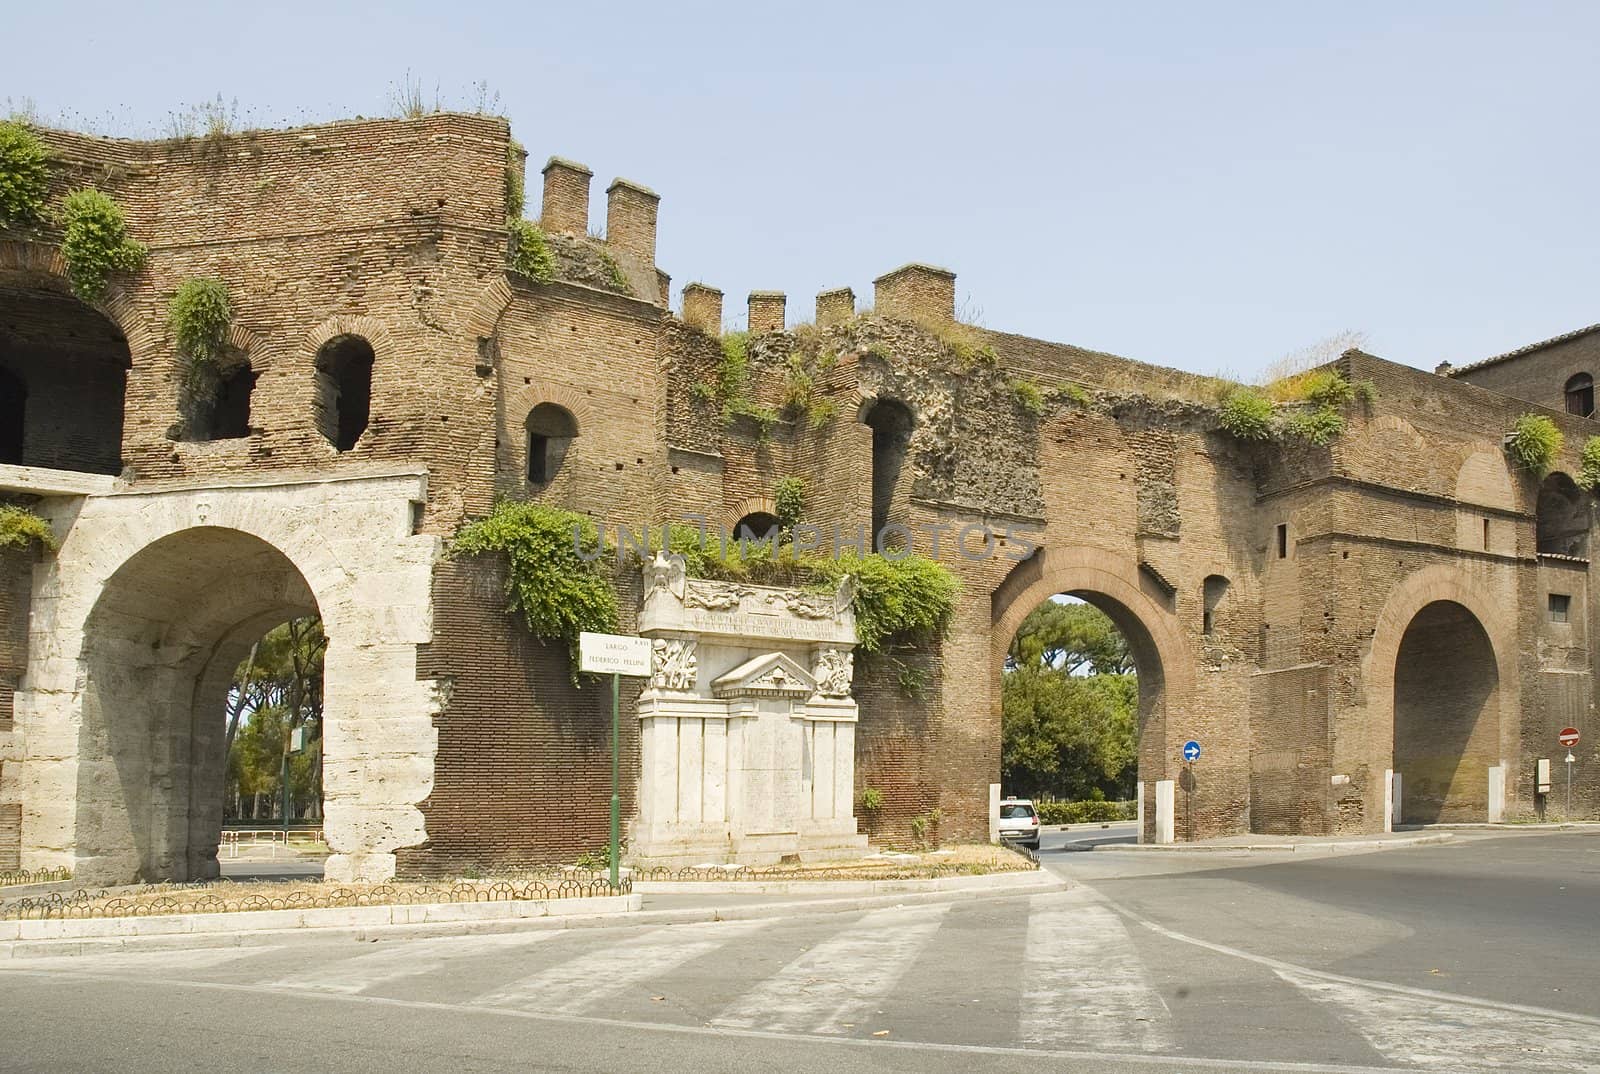 Ancient Roman Gate in the wall at the ned of Via Veneto, now named after Frederico Fellini, and the memorial to those killed in the first world war, a combination of early roman architecture, and modern functionality